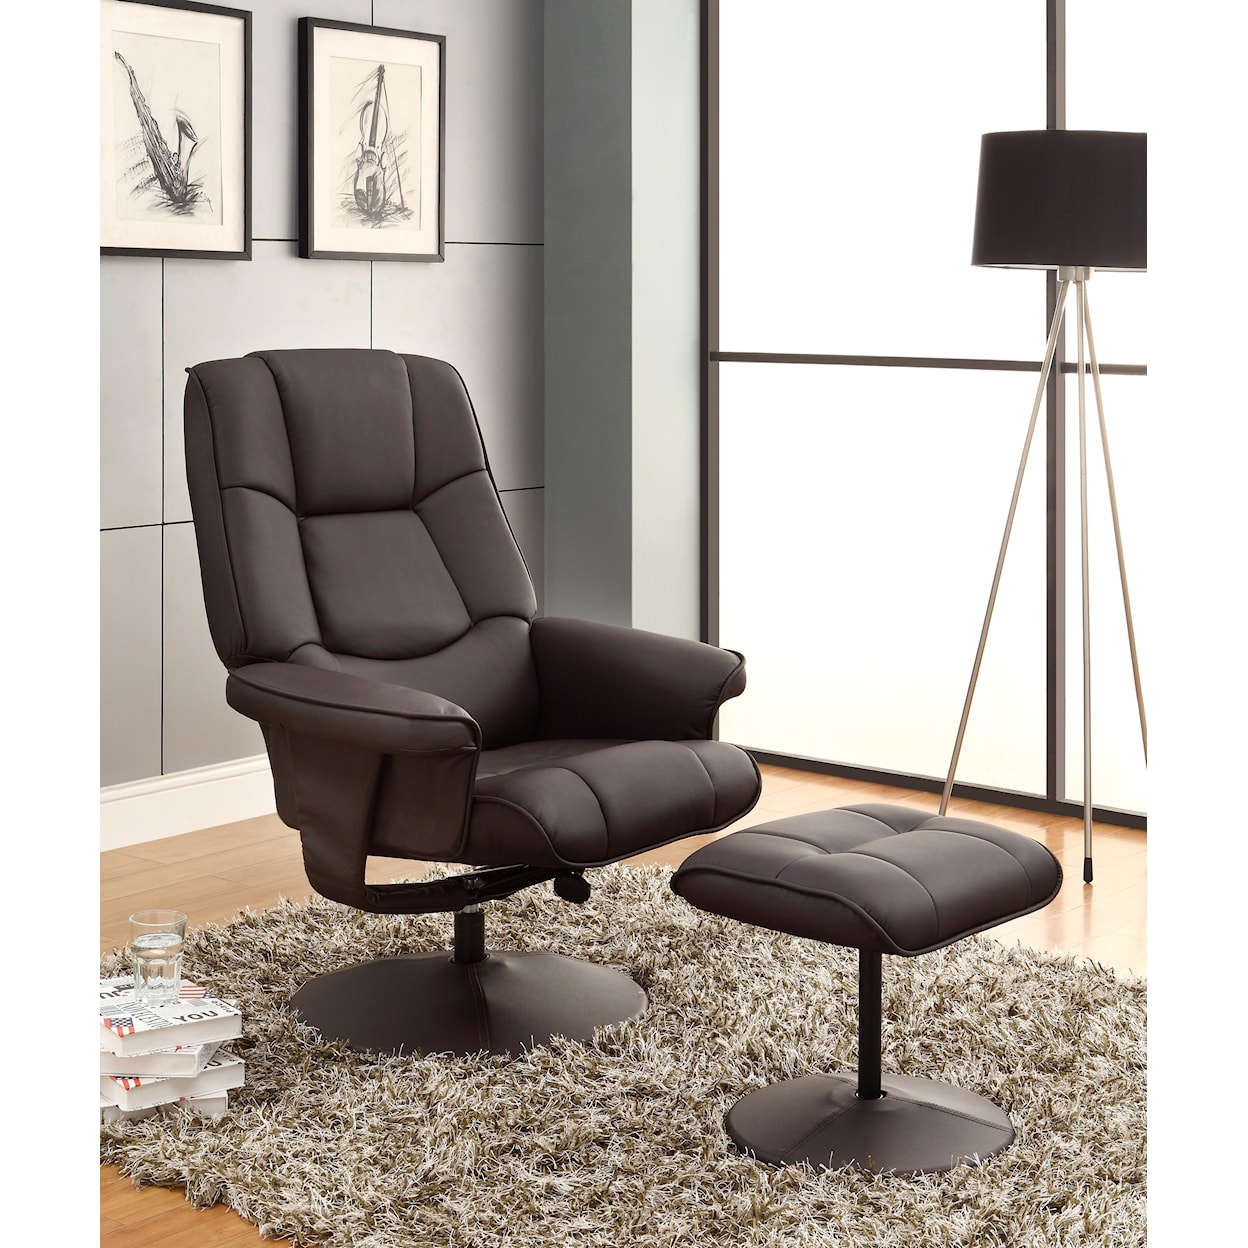 Offshore Furniture Source TG-8021 Recliner with Ottoman